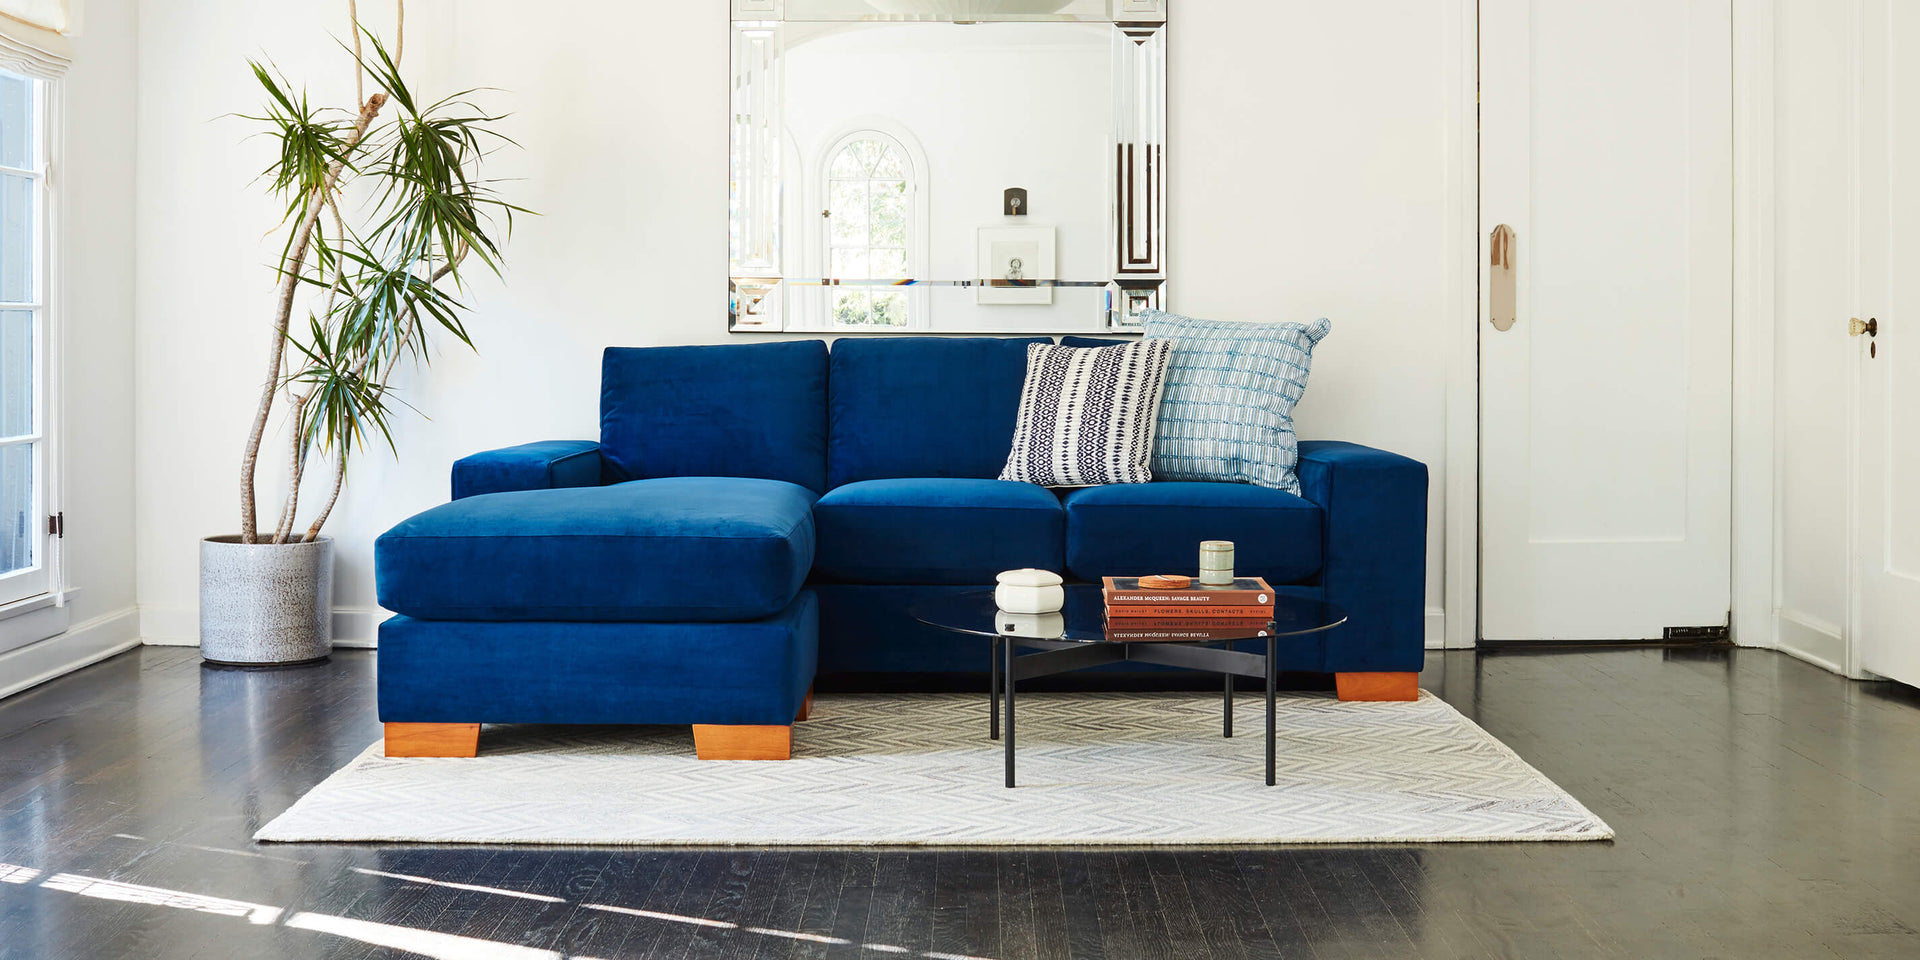 Reversible Chaise Sofas – The Sofas That Move With You - Apt2B